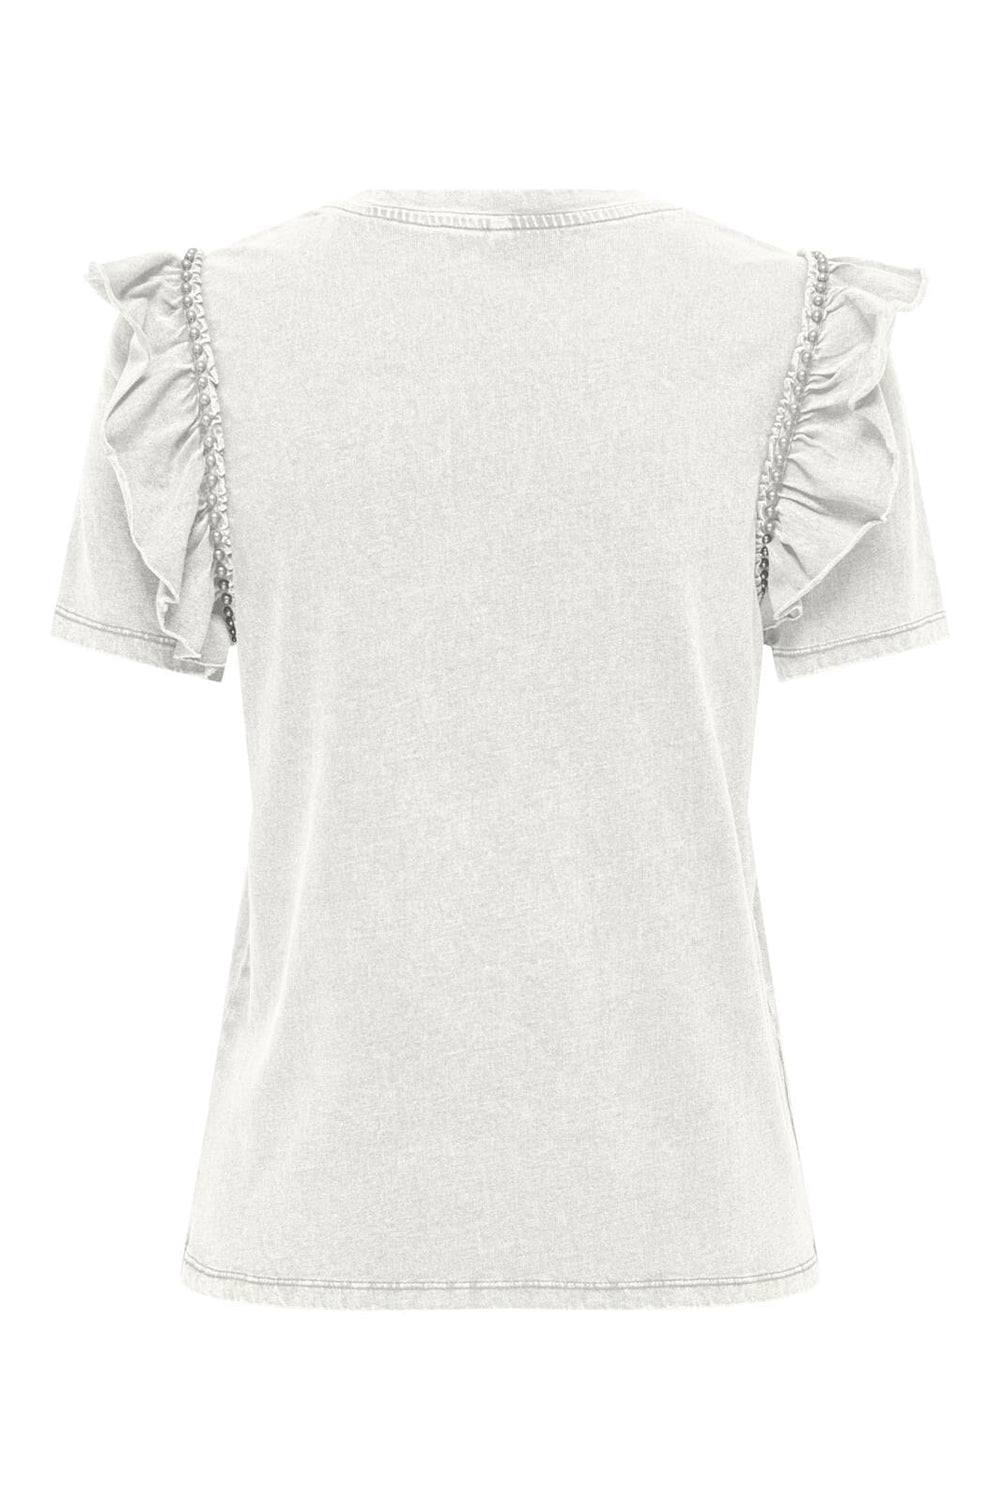 Only - Onllucy S/S Pearl Top - 4649177 Cloud Dancer Pearl